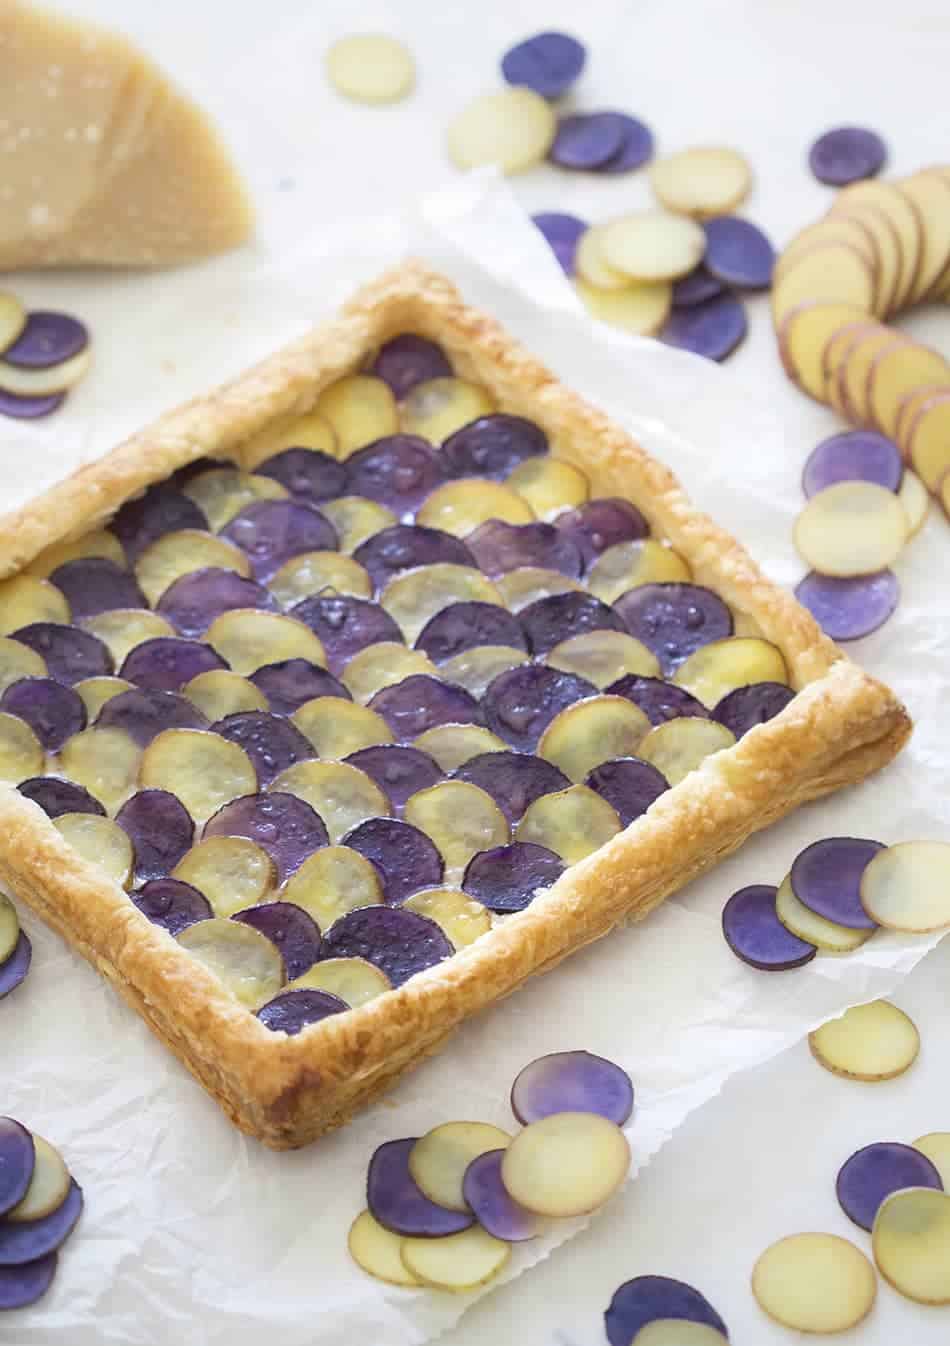 Photo of a stunning tart made from purple and white potatoes